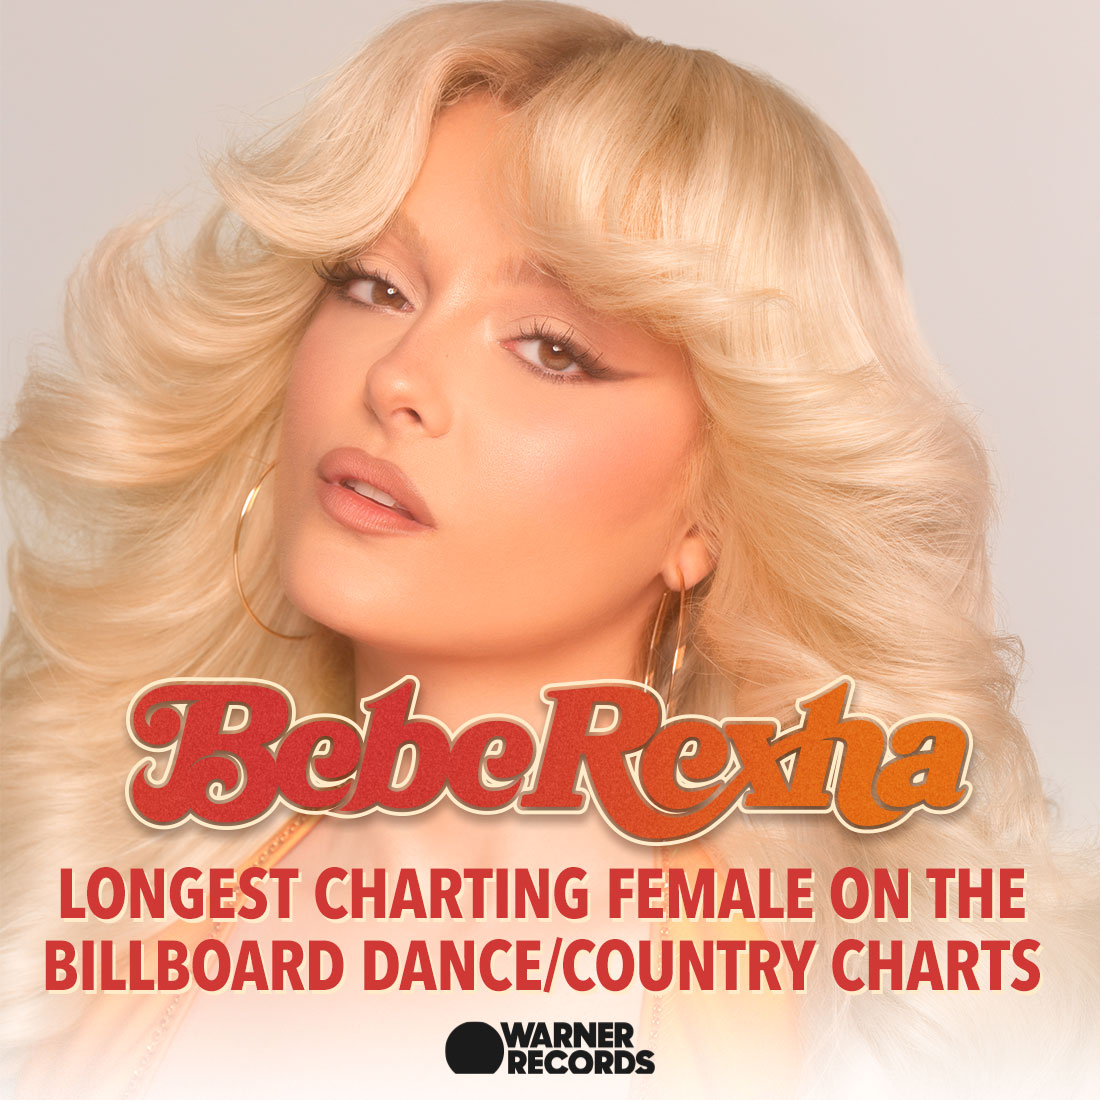 Bebe Rexha is the Longest Charting Female on the Billboard Dance/Country Charts